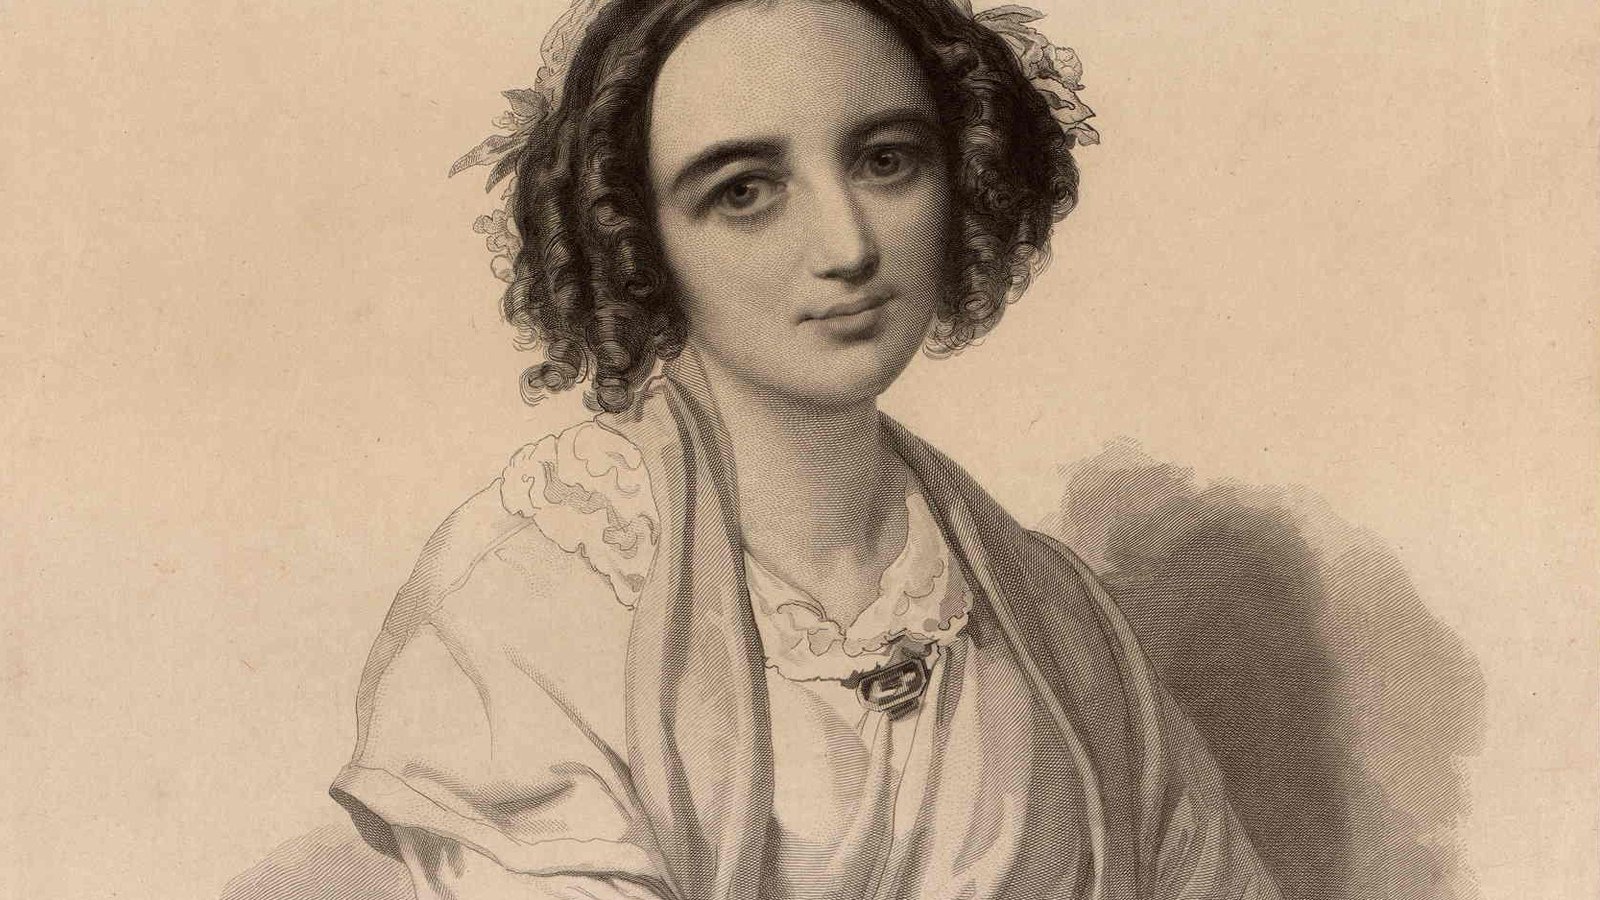 J.W. Pepper birthday to composer and pianist Fanny Mendelssohn Hensel, born on this date in 1805! #vocal #piano